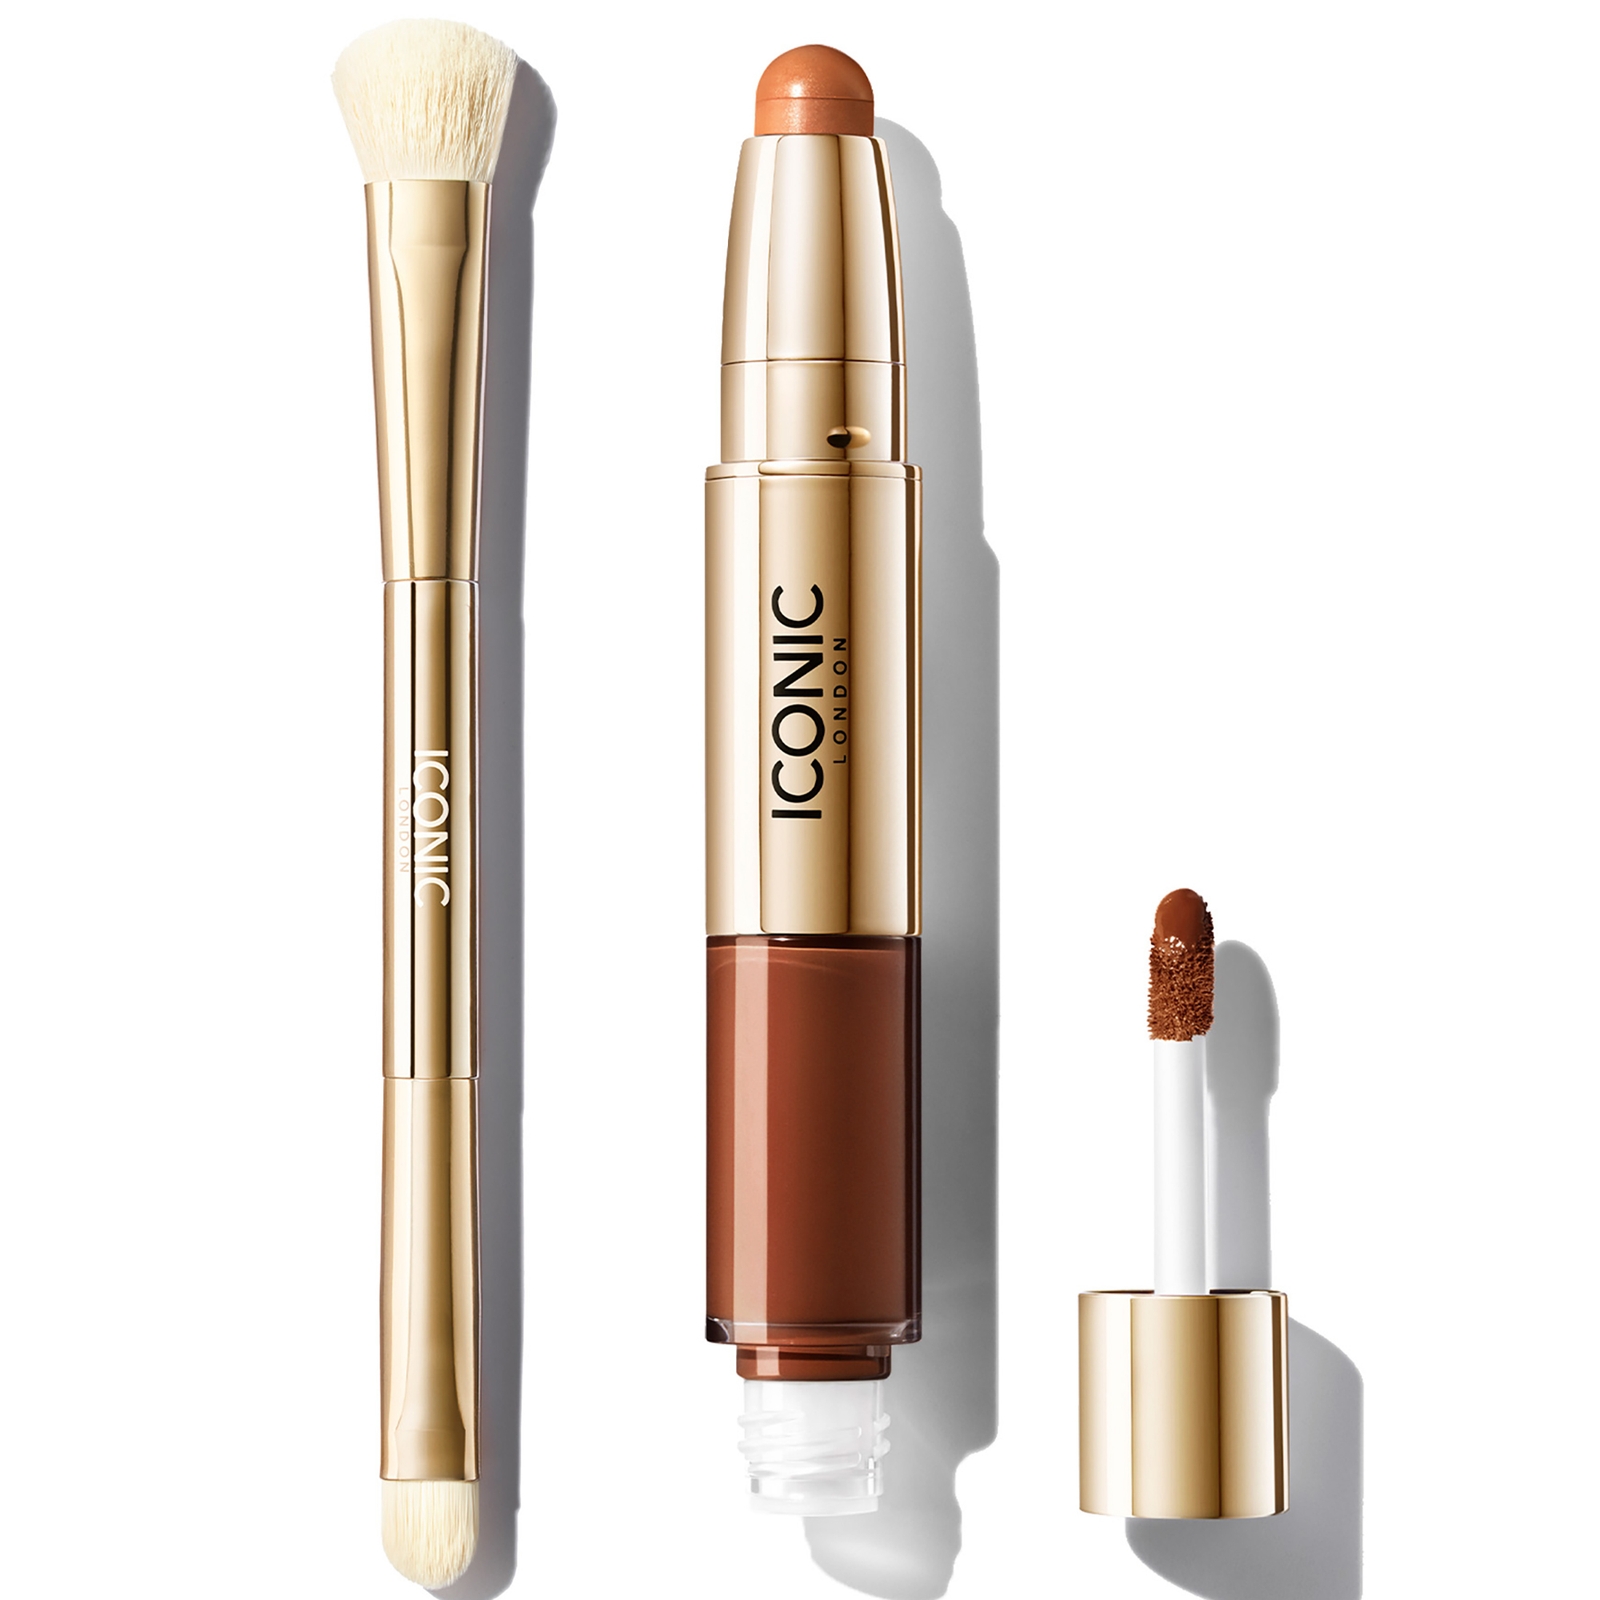 Iconic London Radiant Concealer And Brush Bundle (various Shades) - Warm Rich